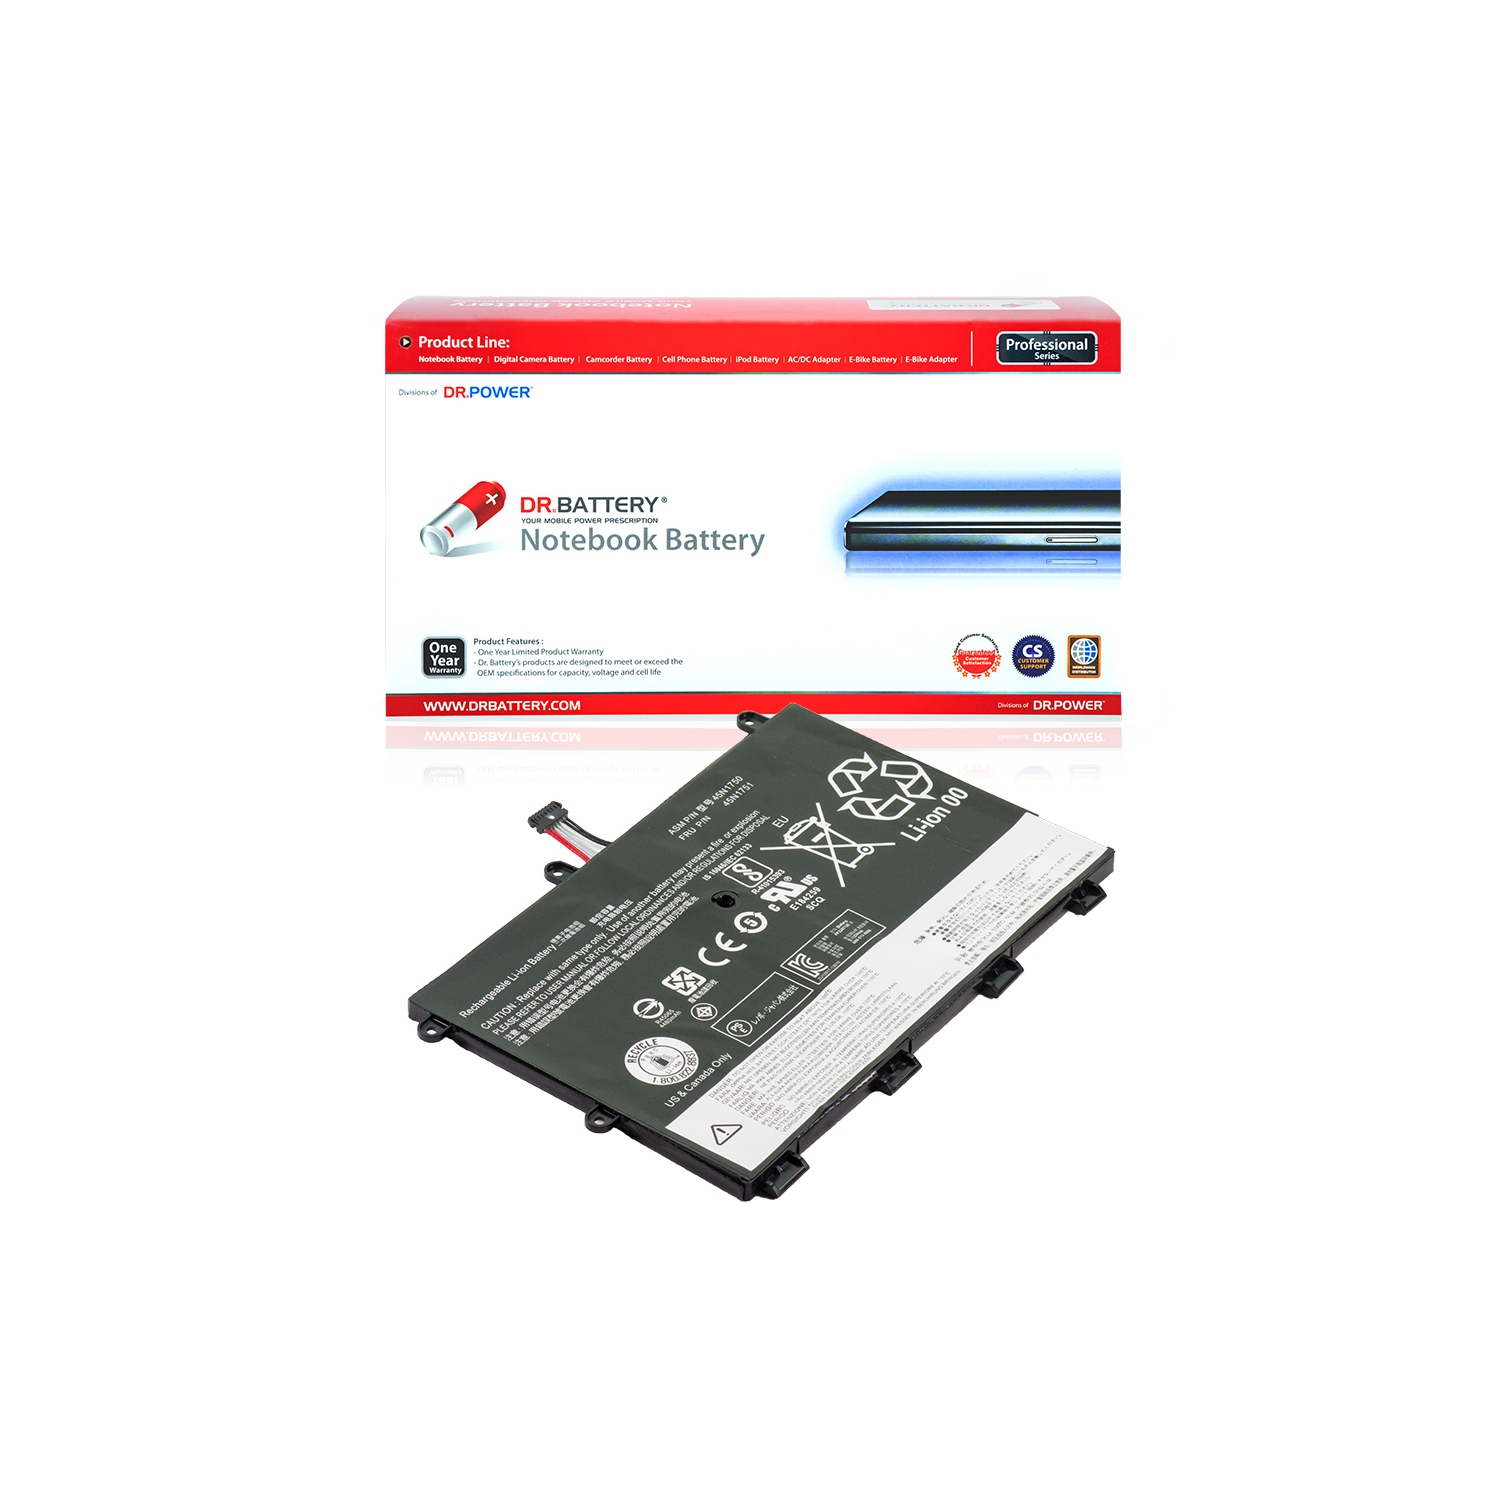 DR. BATTERY - Replacement for Lenovo ThinkPad Yoga 11e 20D9001JUS / 20D90025US / 20D90026US / 20D90027US / 702 / 2ICP6 / 50